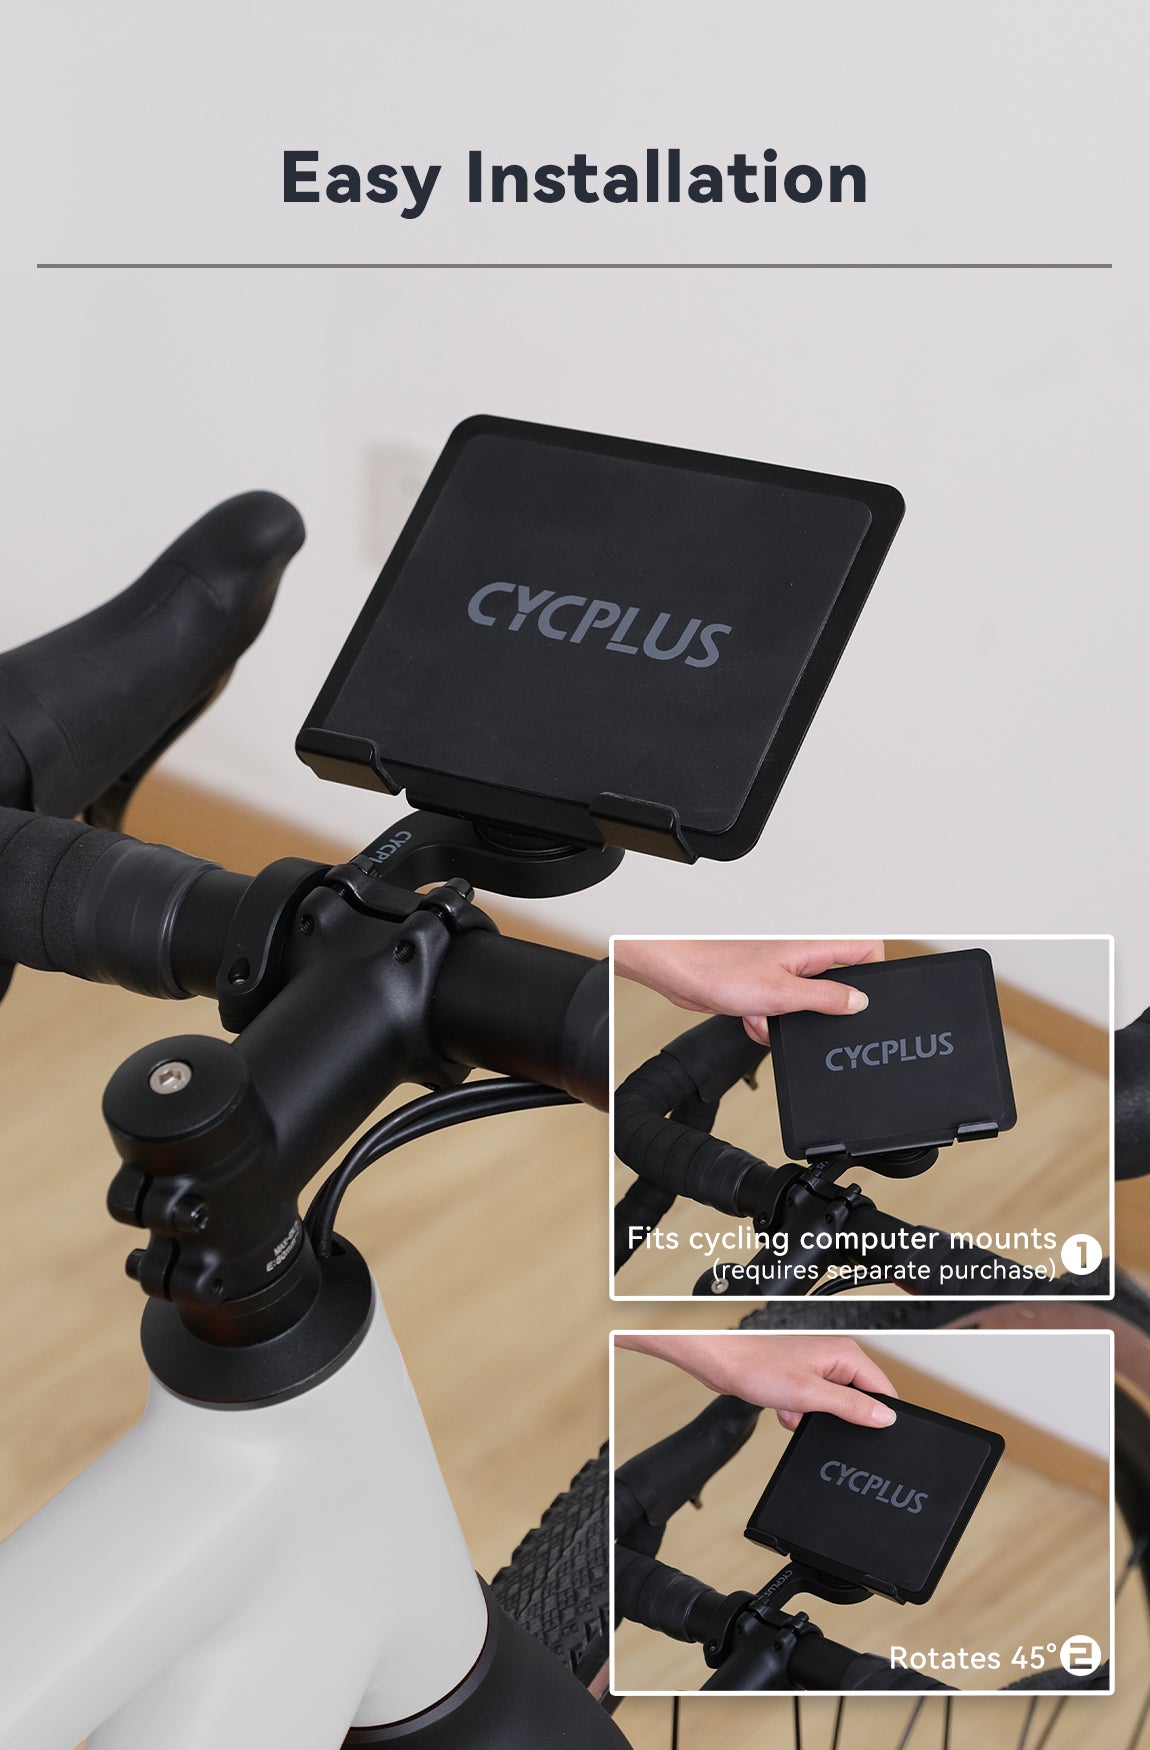 Easy Installation  1. Fits cycling computer mounts (requires separate purchase). 2. Rotates 45°.